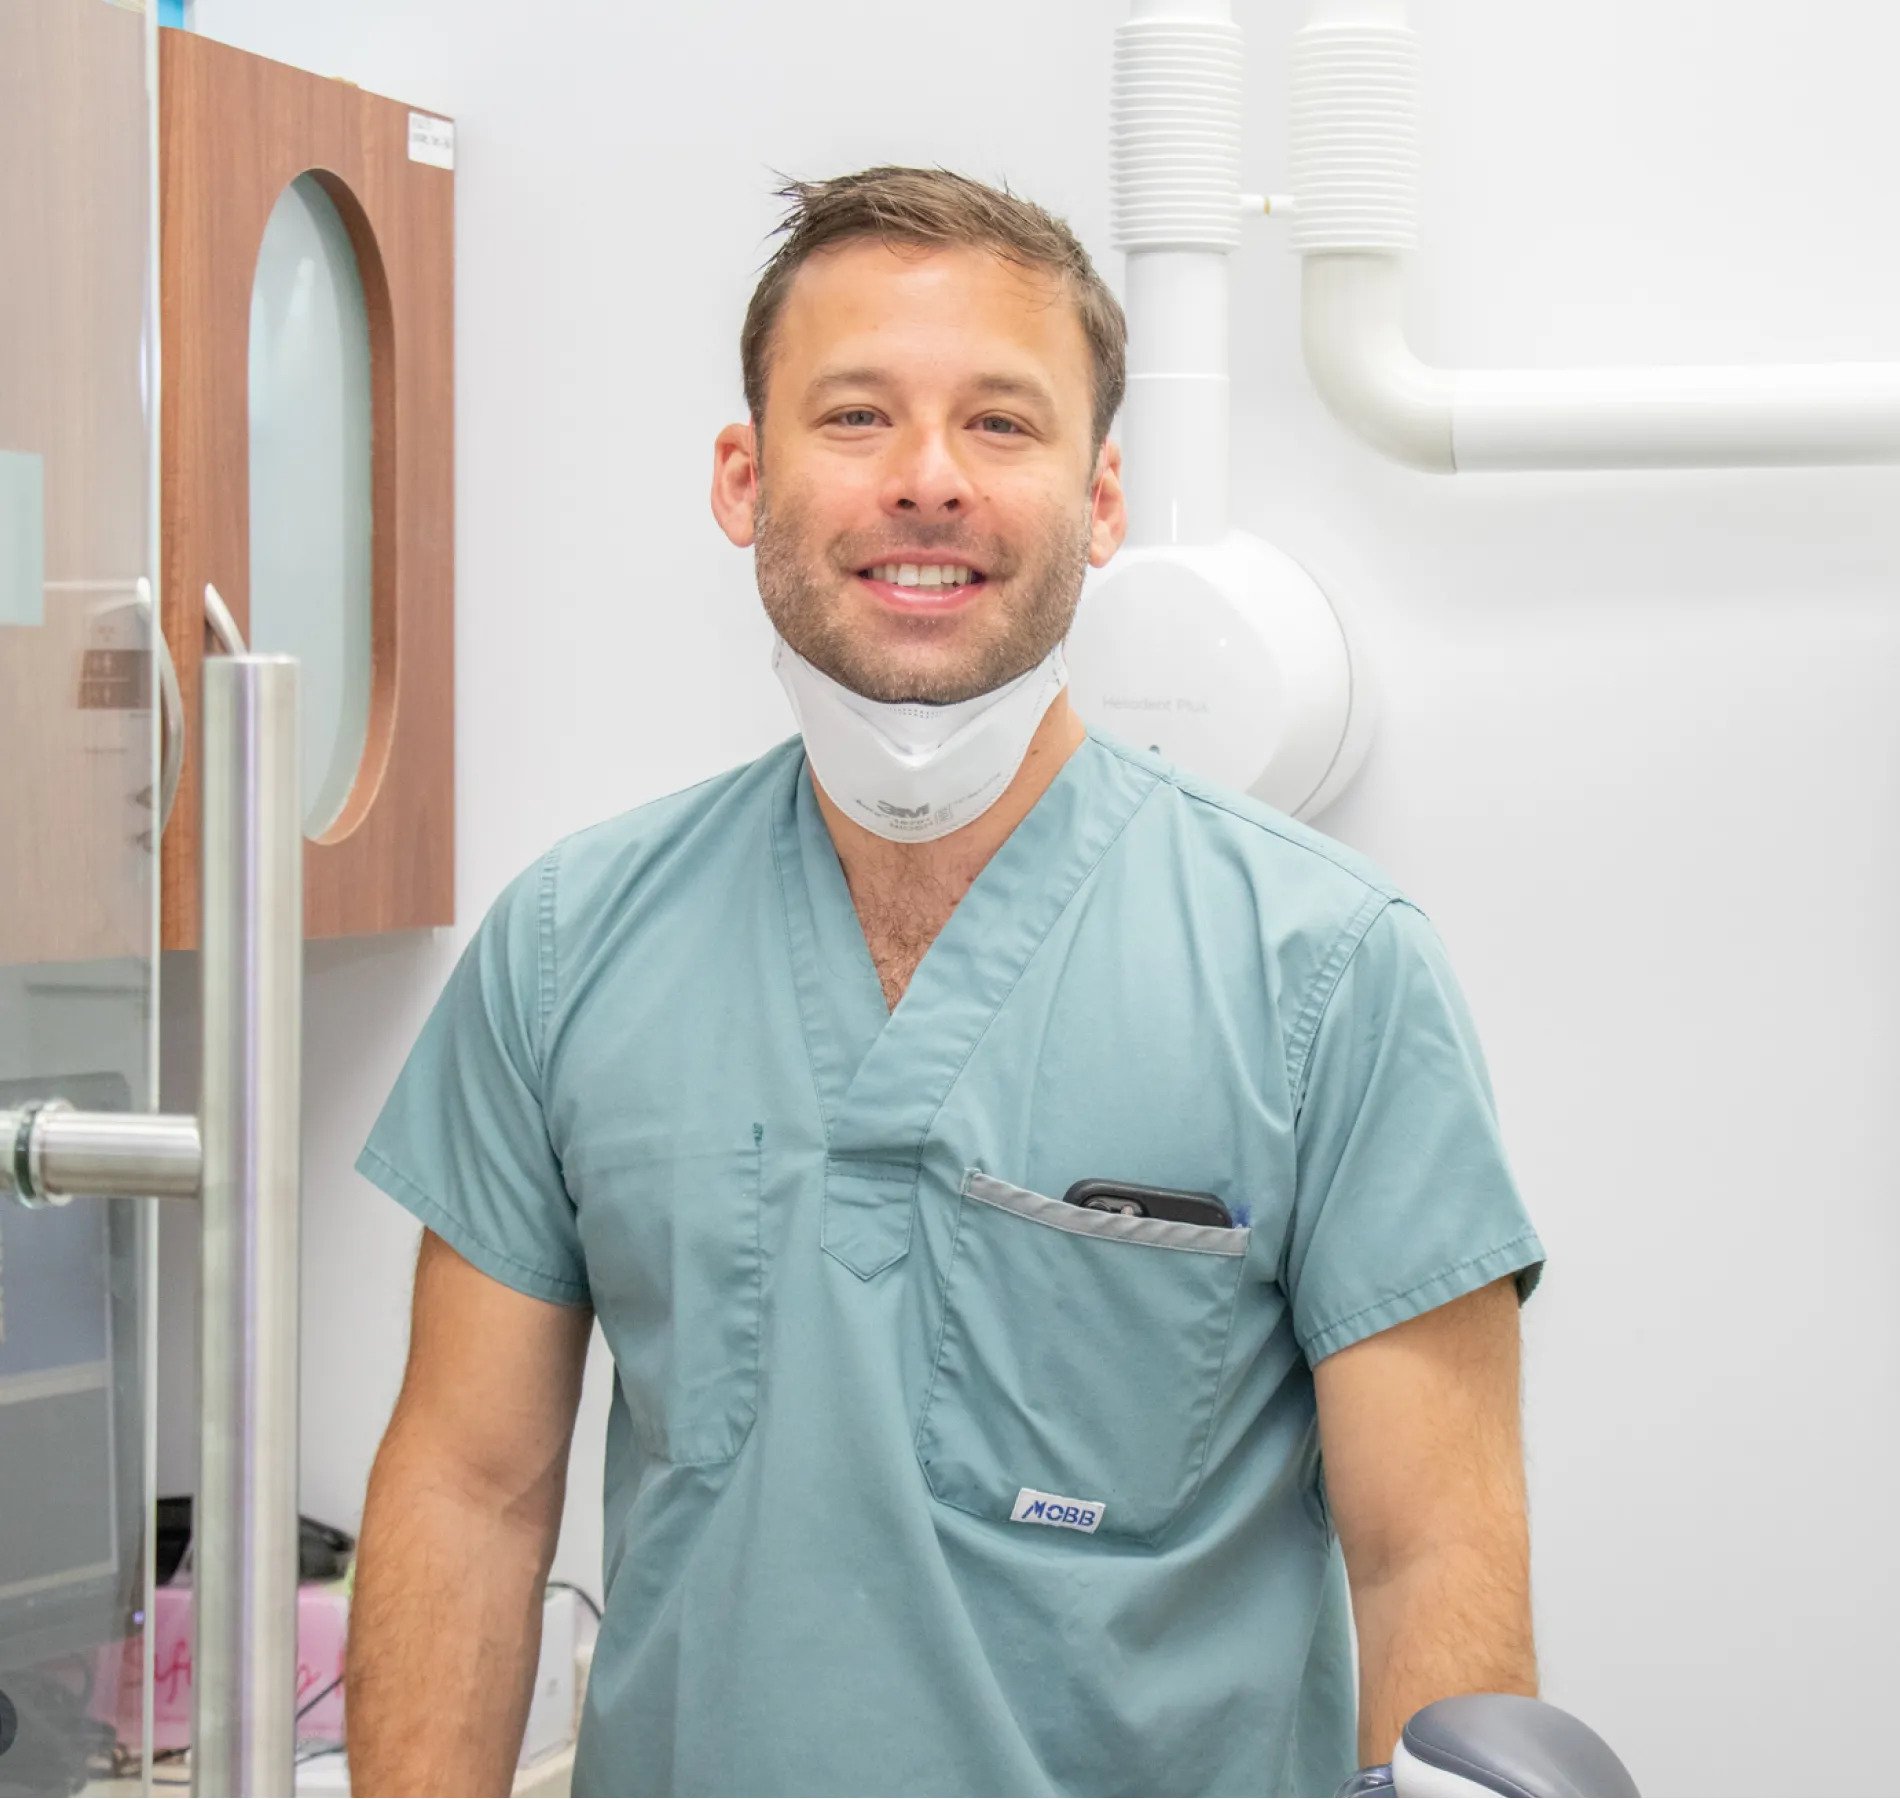 Dr. Margel is a Midtown Toronto dentist